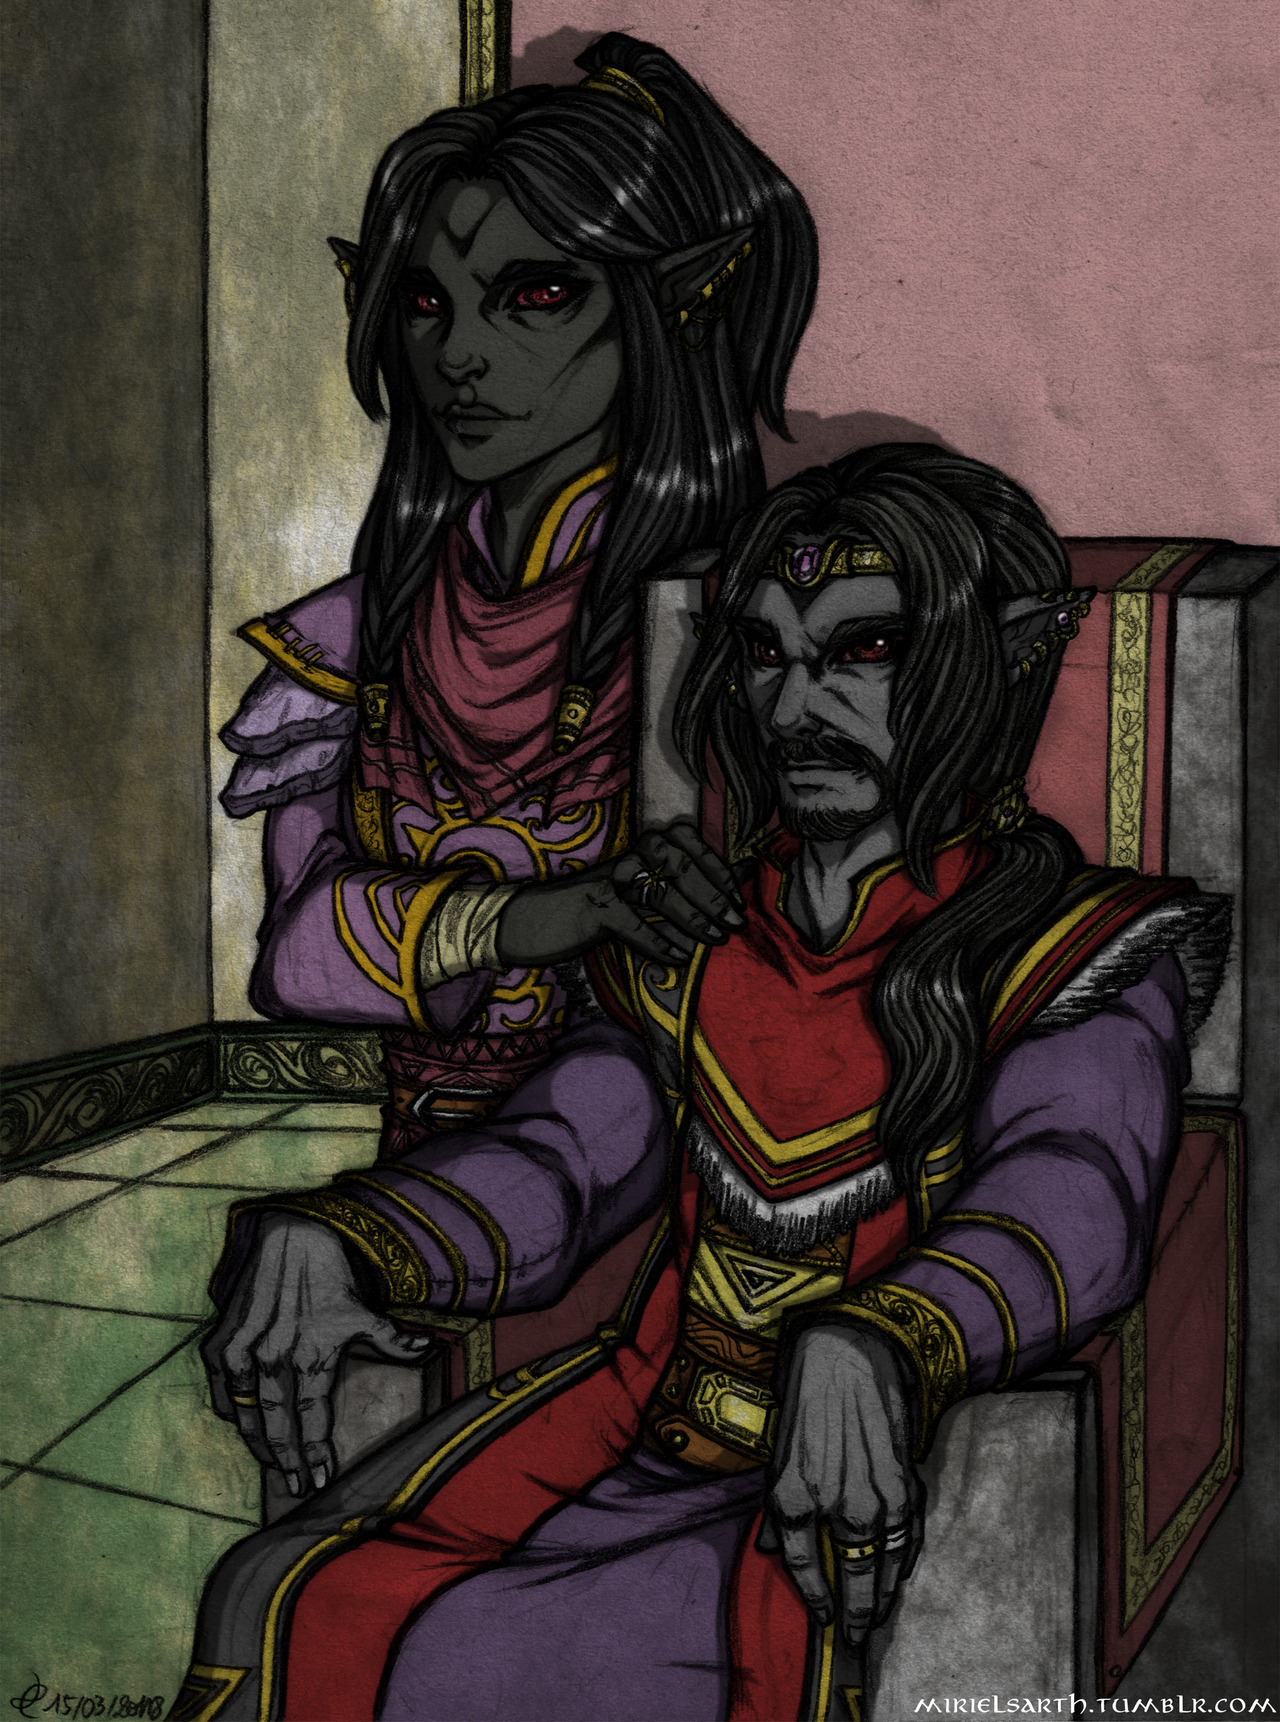 Miriel S Art King Helseth Hlaalu And His Chief Advisor Asenath The nerevarine weighs in on what's going on in the aftermath of the temporal disturbance. miriel s art king helseth hlaalu and